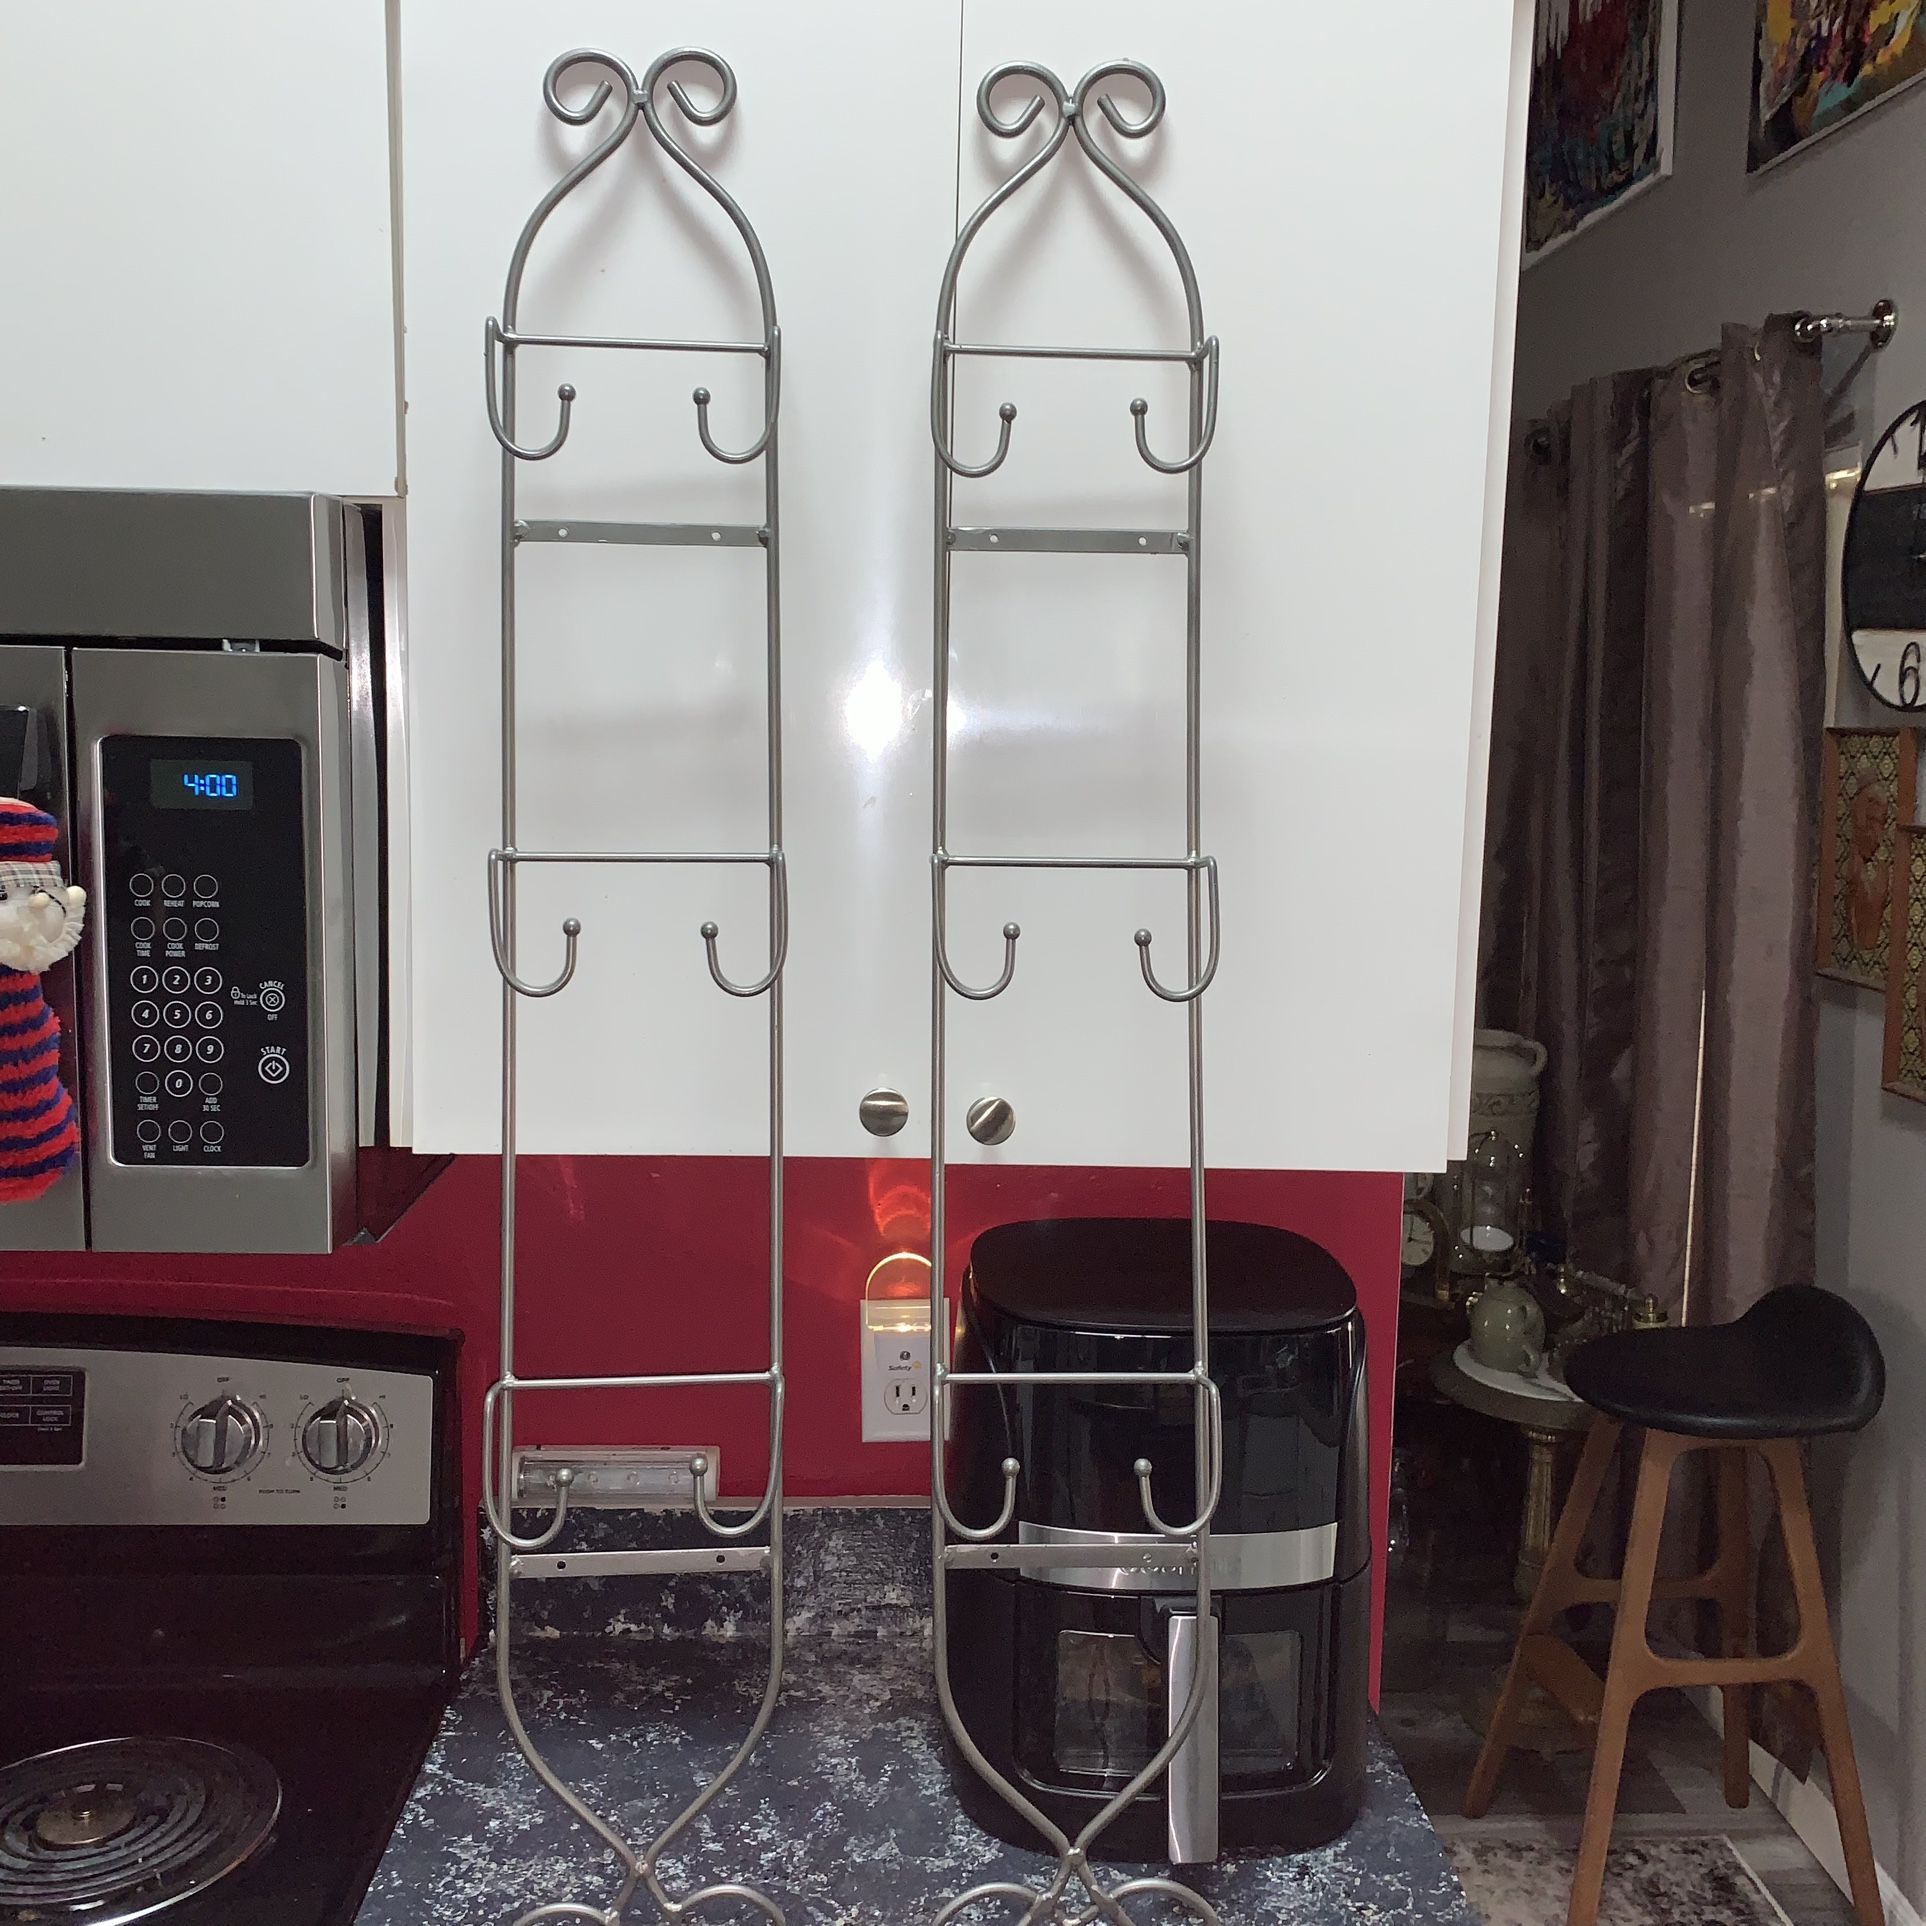 New Condition (CHOICE OF 2) Metal Wall Or Door  Hanging Racks Hooks Towels Bags Purses Etc